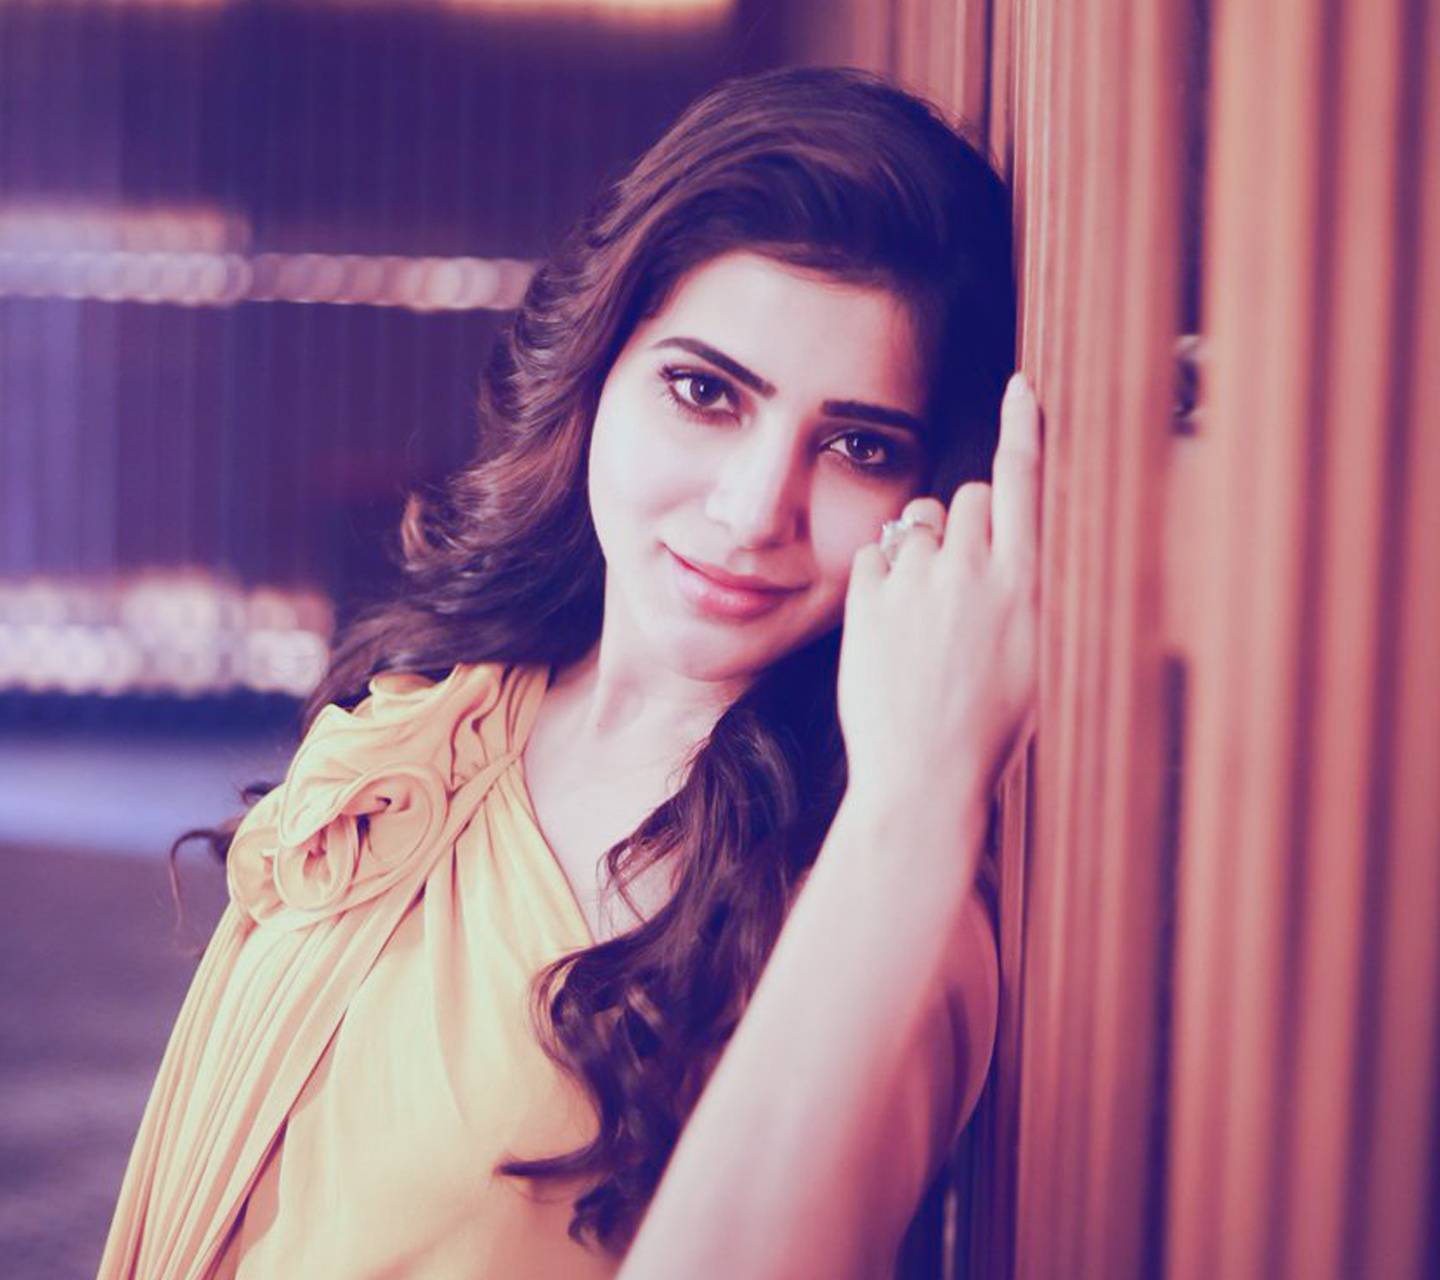 Samantha Akkineni wallpaper by invisiblesmilesss - Download on